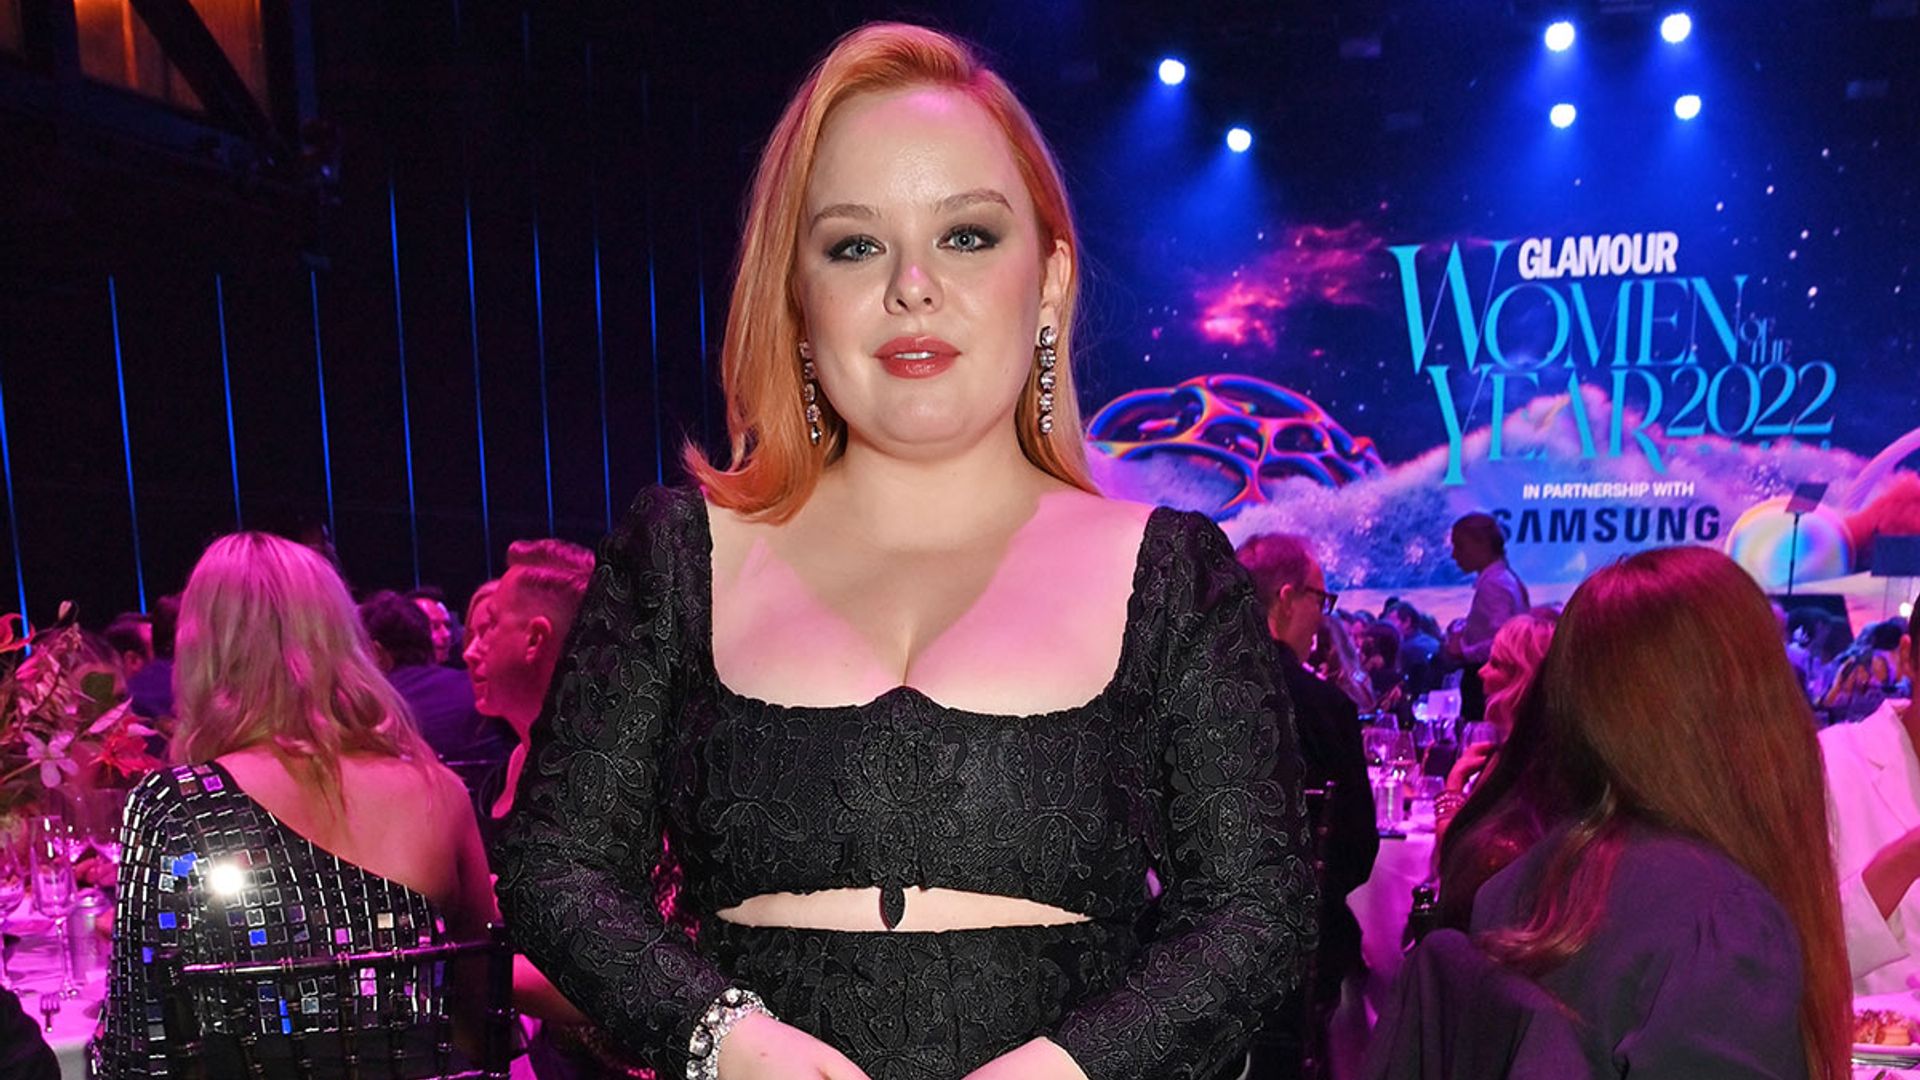 nicola coughlan in black dress at glamour women of the year awards